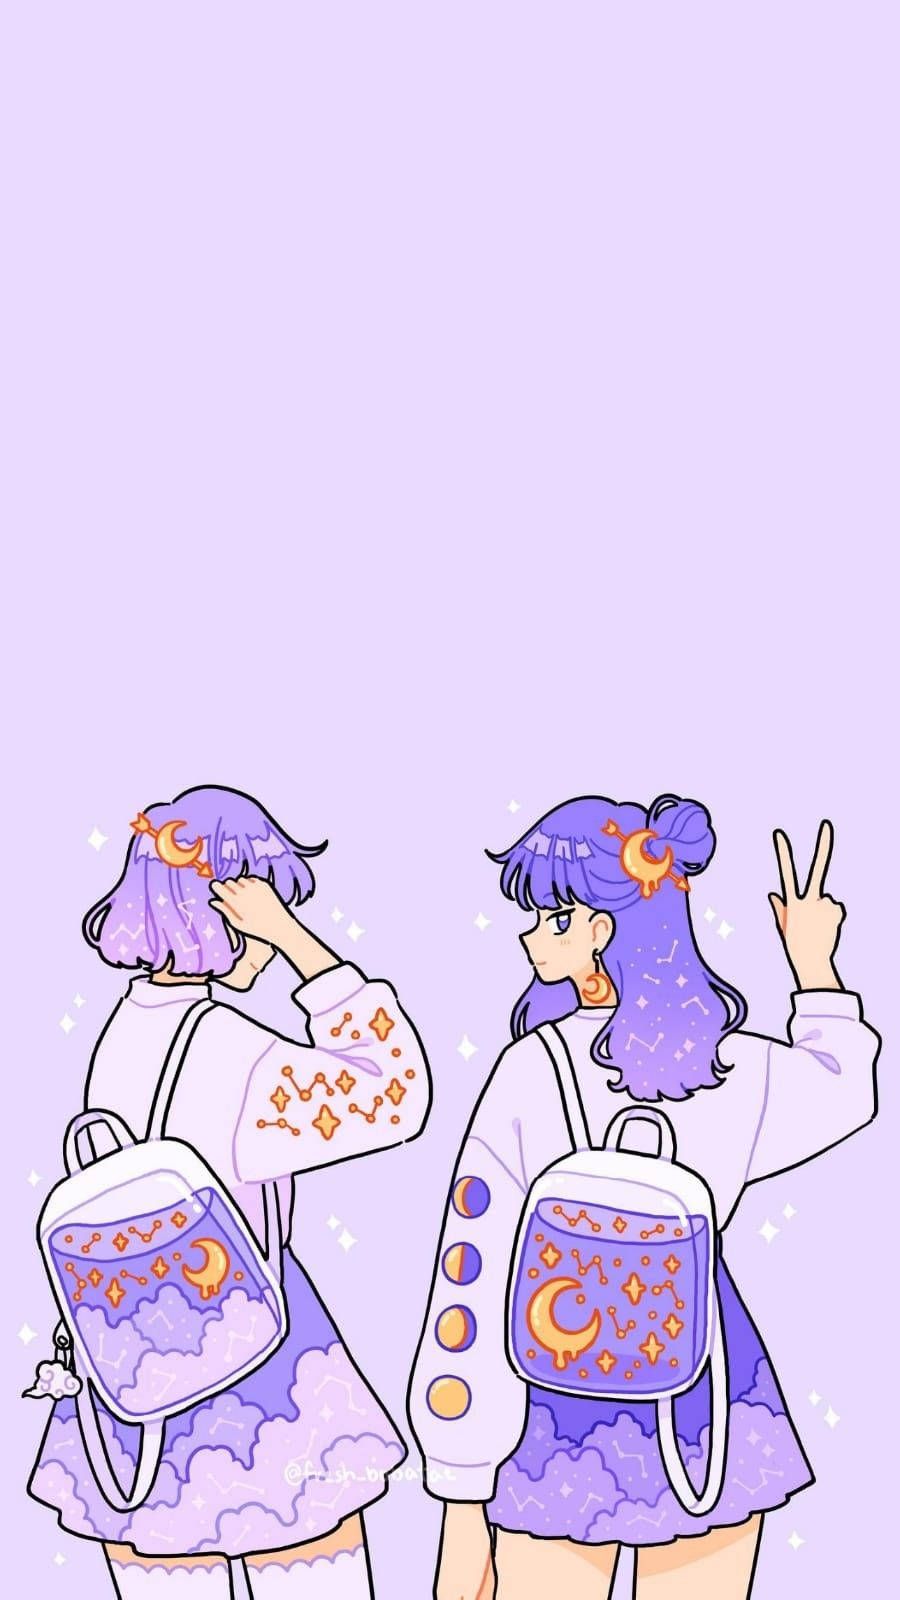 Two cute girls in purple and pink outfits with backpacks - Kawaii